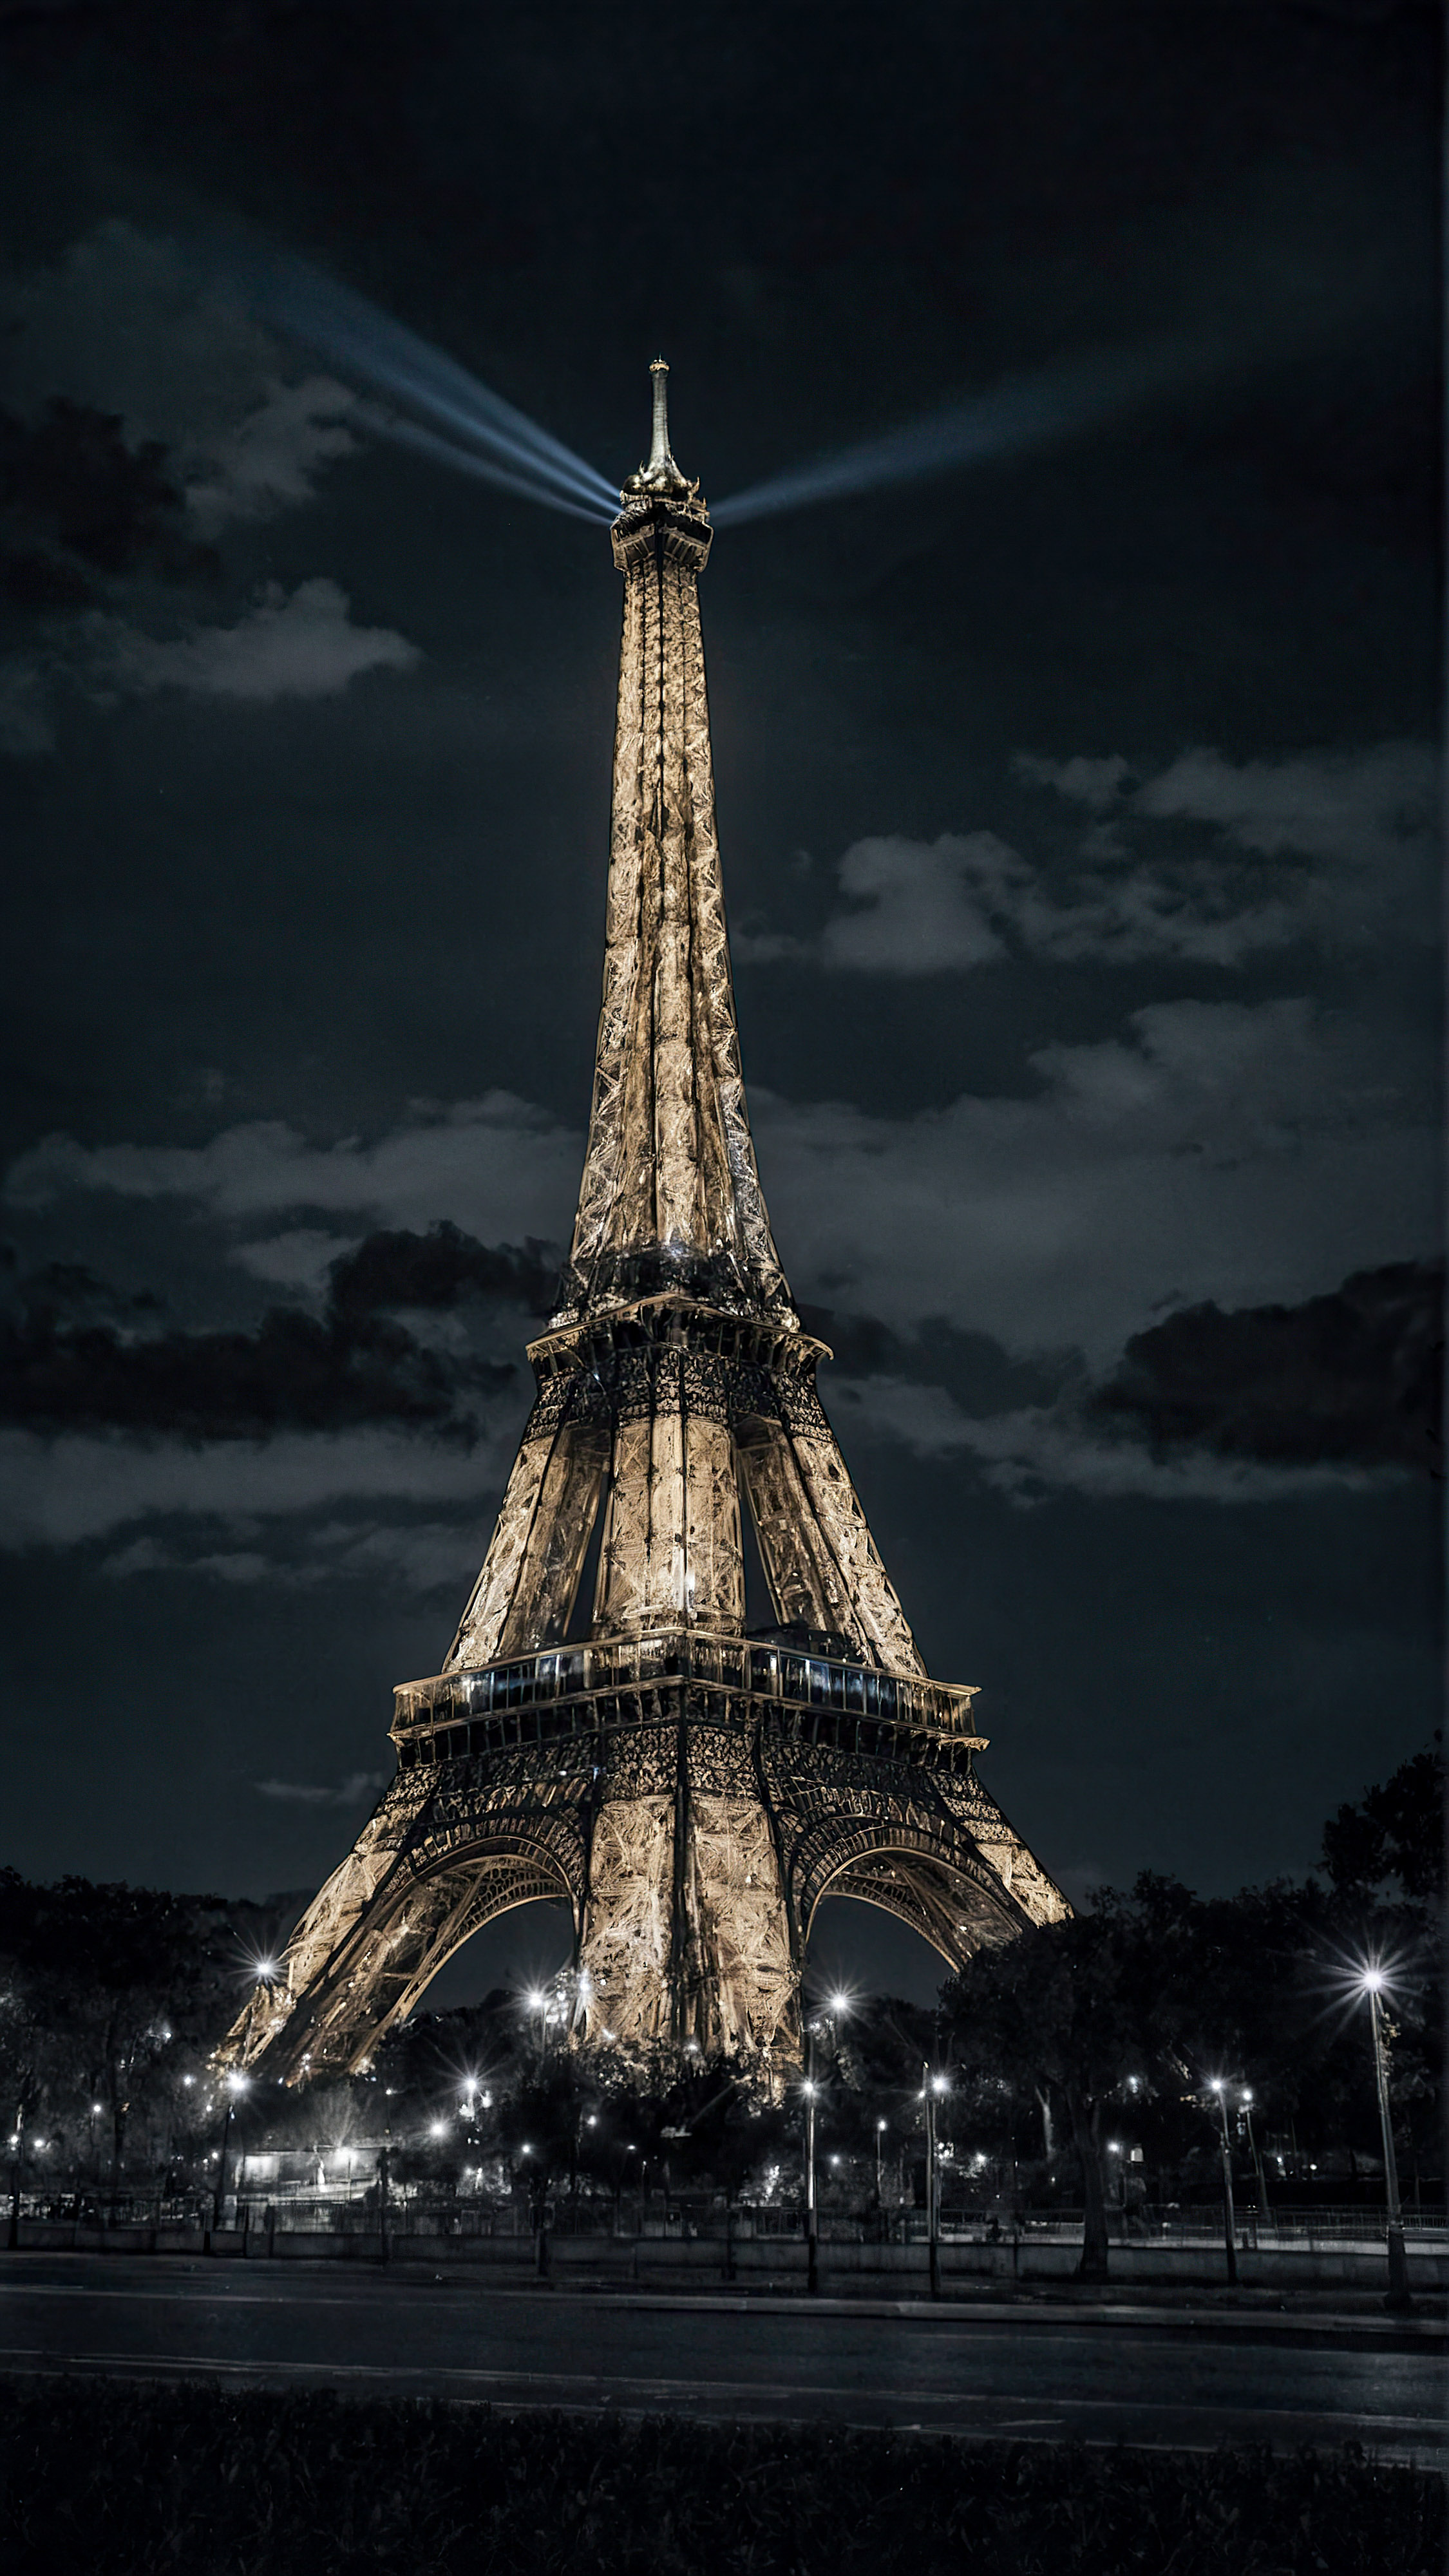 Experience the charm of Paris with our black iPhone wallpaper in 4K, featuring the Eiffel Tower illuminated at night, standing majestically against a dark sky.